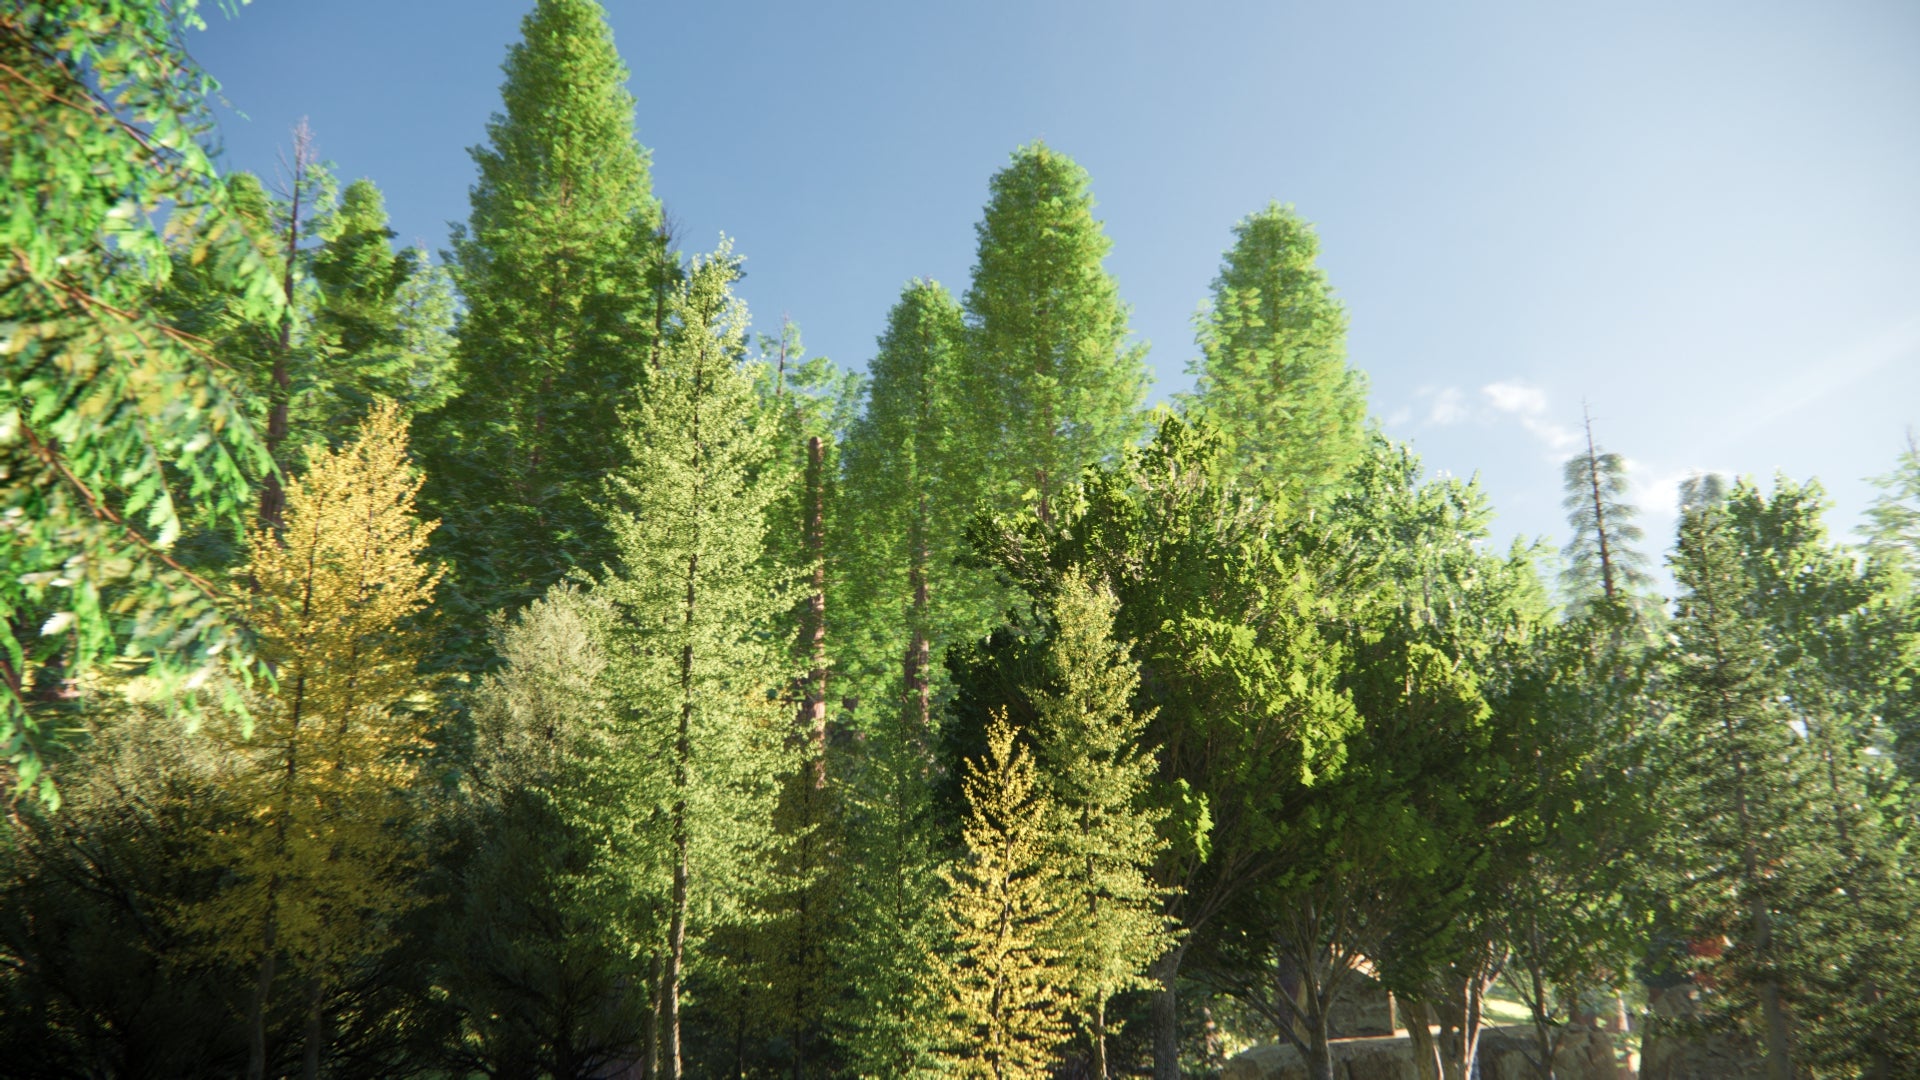 Low Poly Bundle 52 - North American Trees (3D Model)